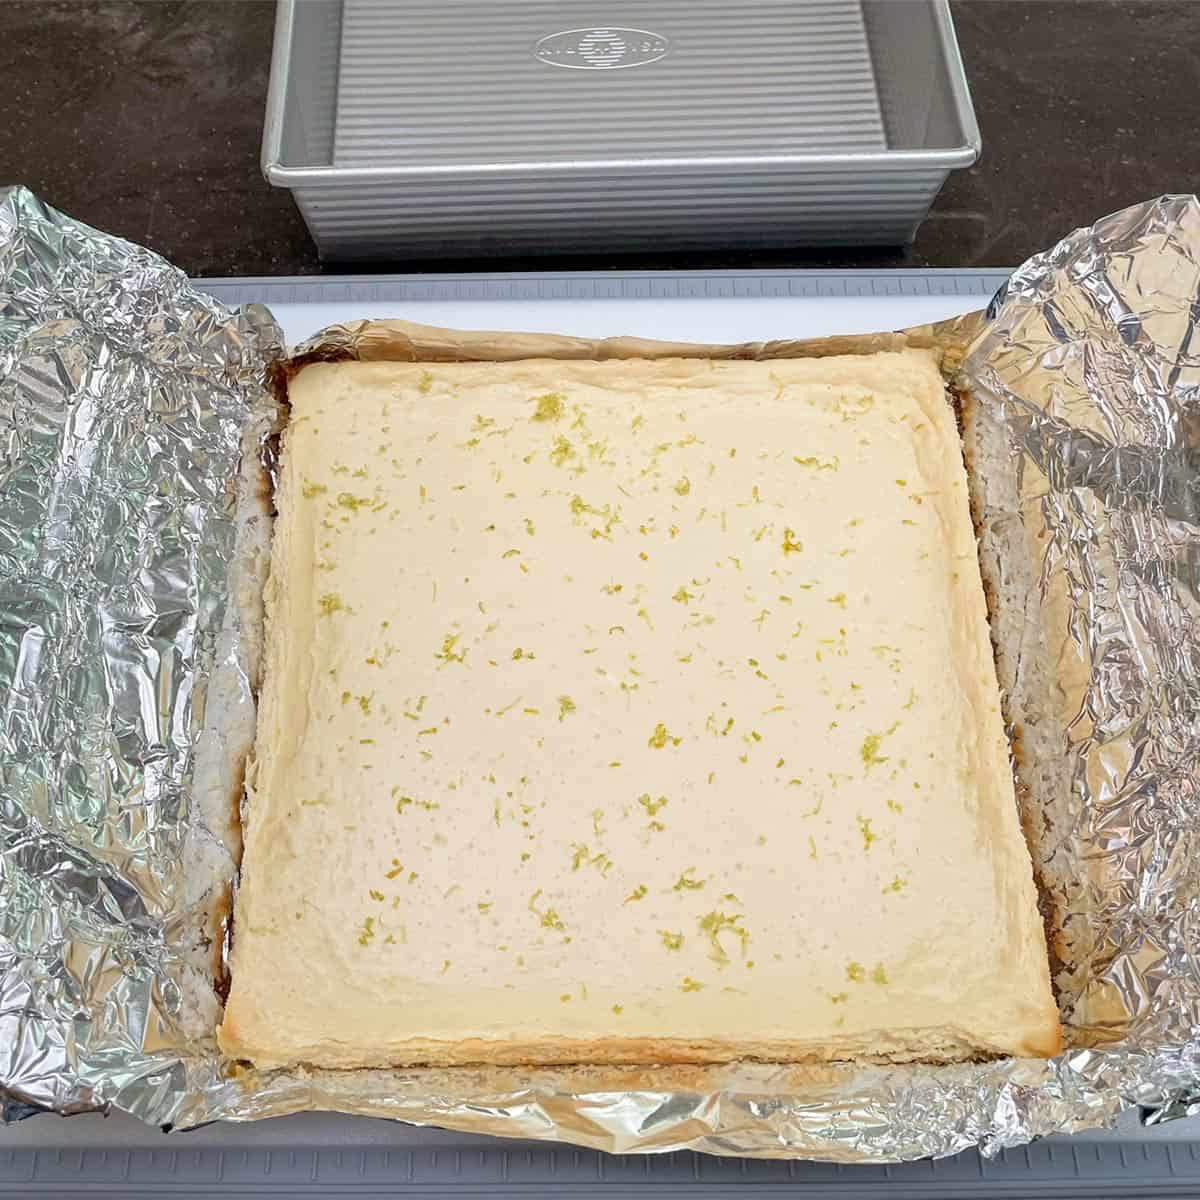 After pulling the whole cheesecake out of the pan by the tinfoil handles and setting it on a cutting board.